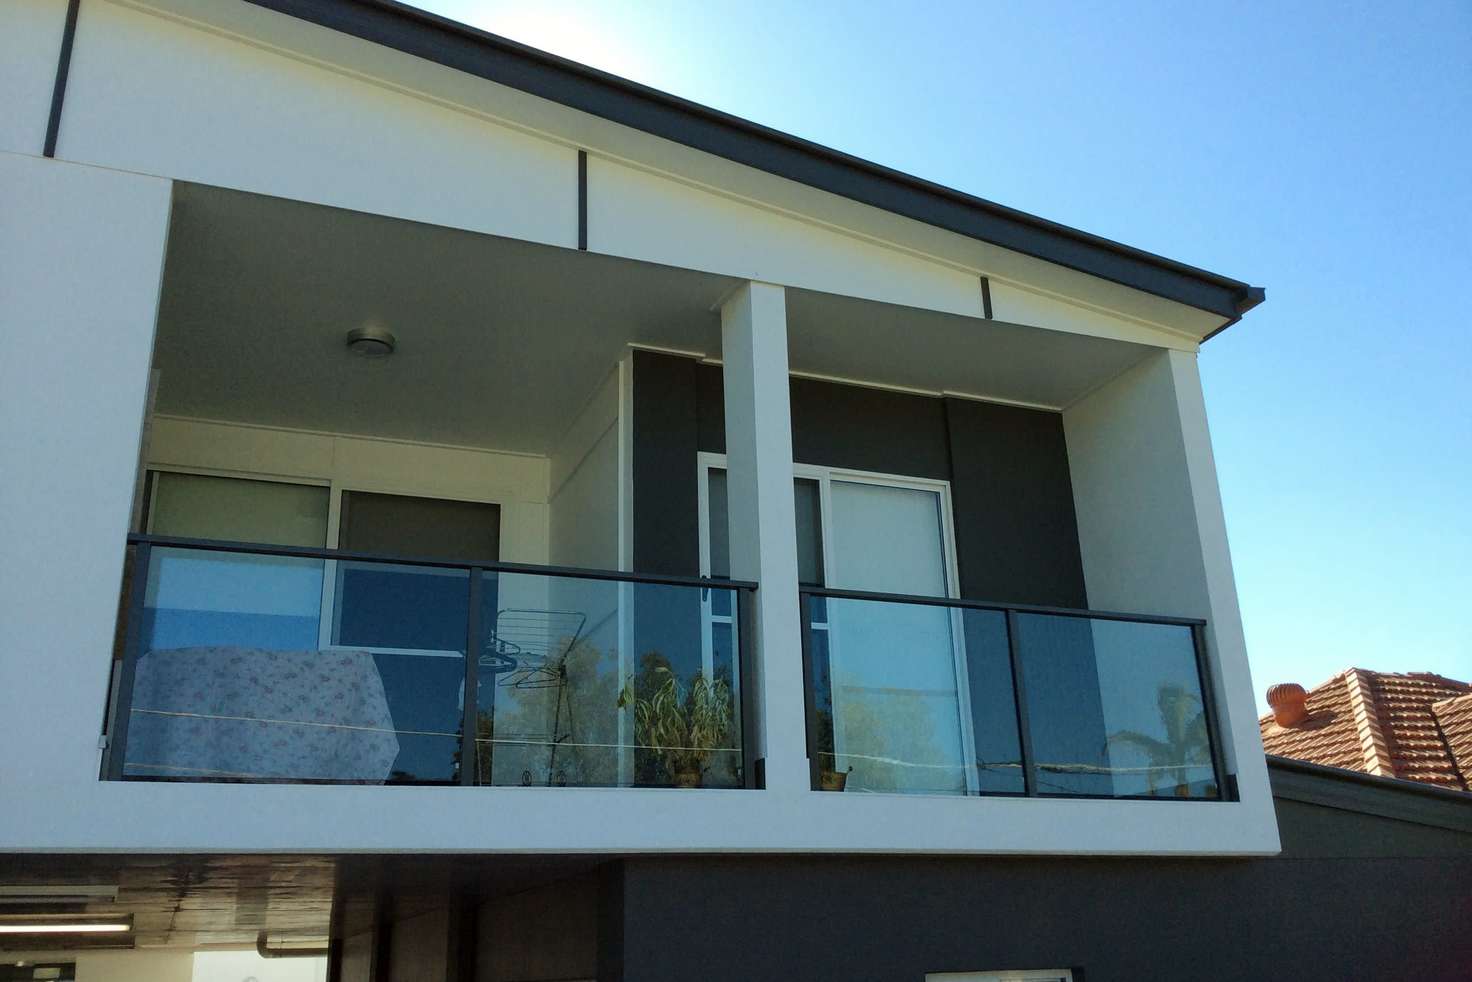 Main view of Homely apartment listing, 6/51 Elizabeth St St, Acacia Ridge QLD 4110